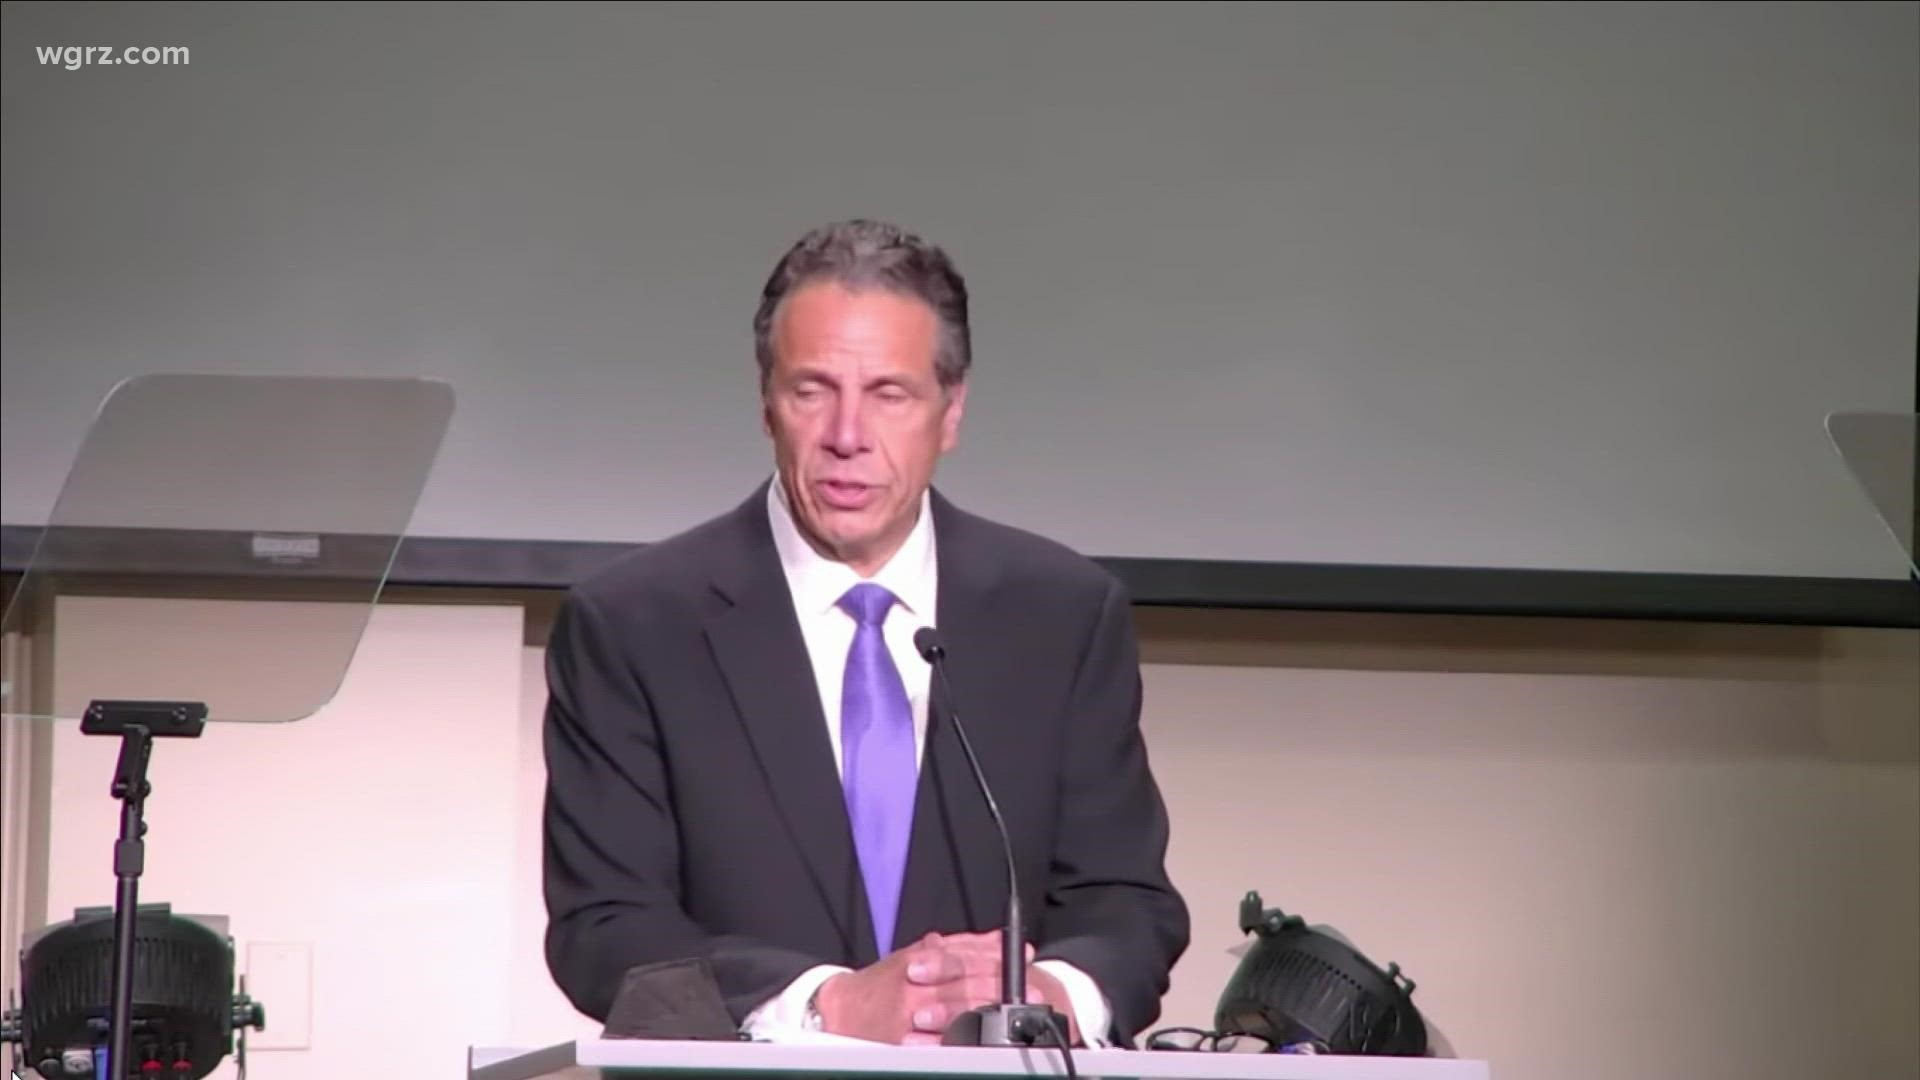 Cuomo was invited to speak at God's Battalion of Prayer Church and he did so for about a half hour. He called the events that led to his resignation